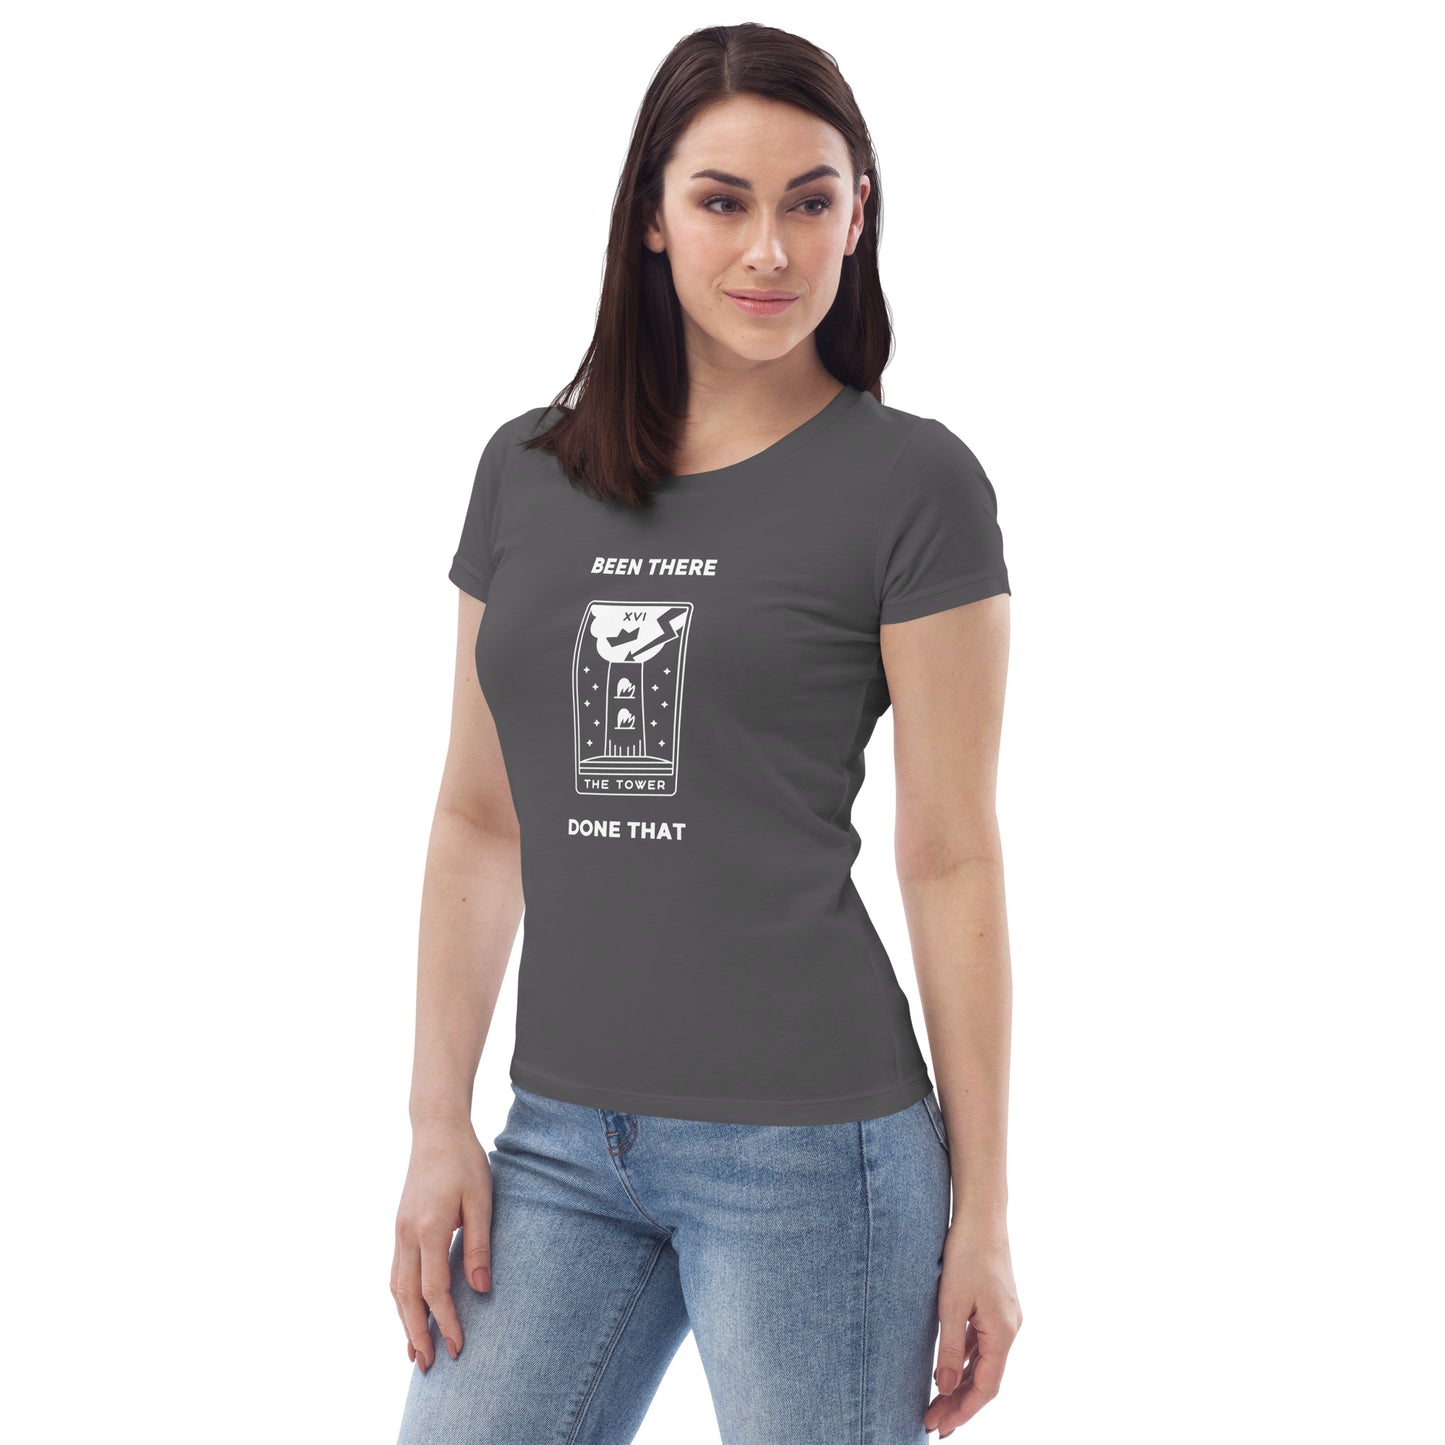 Been there, done that. Tower moment t-shirt